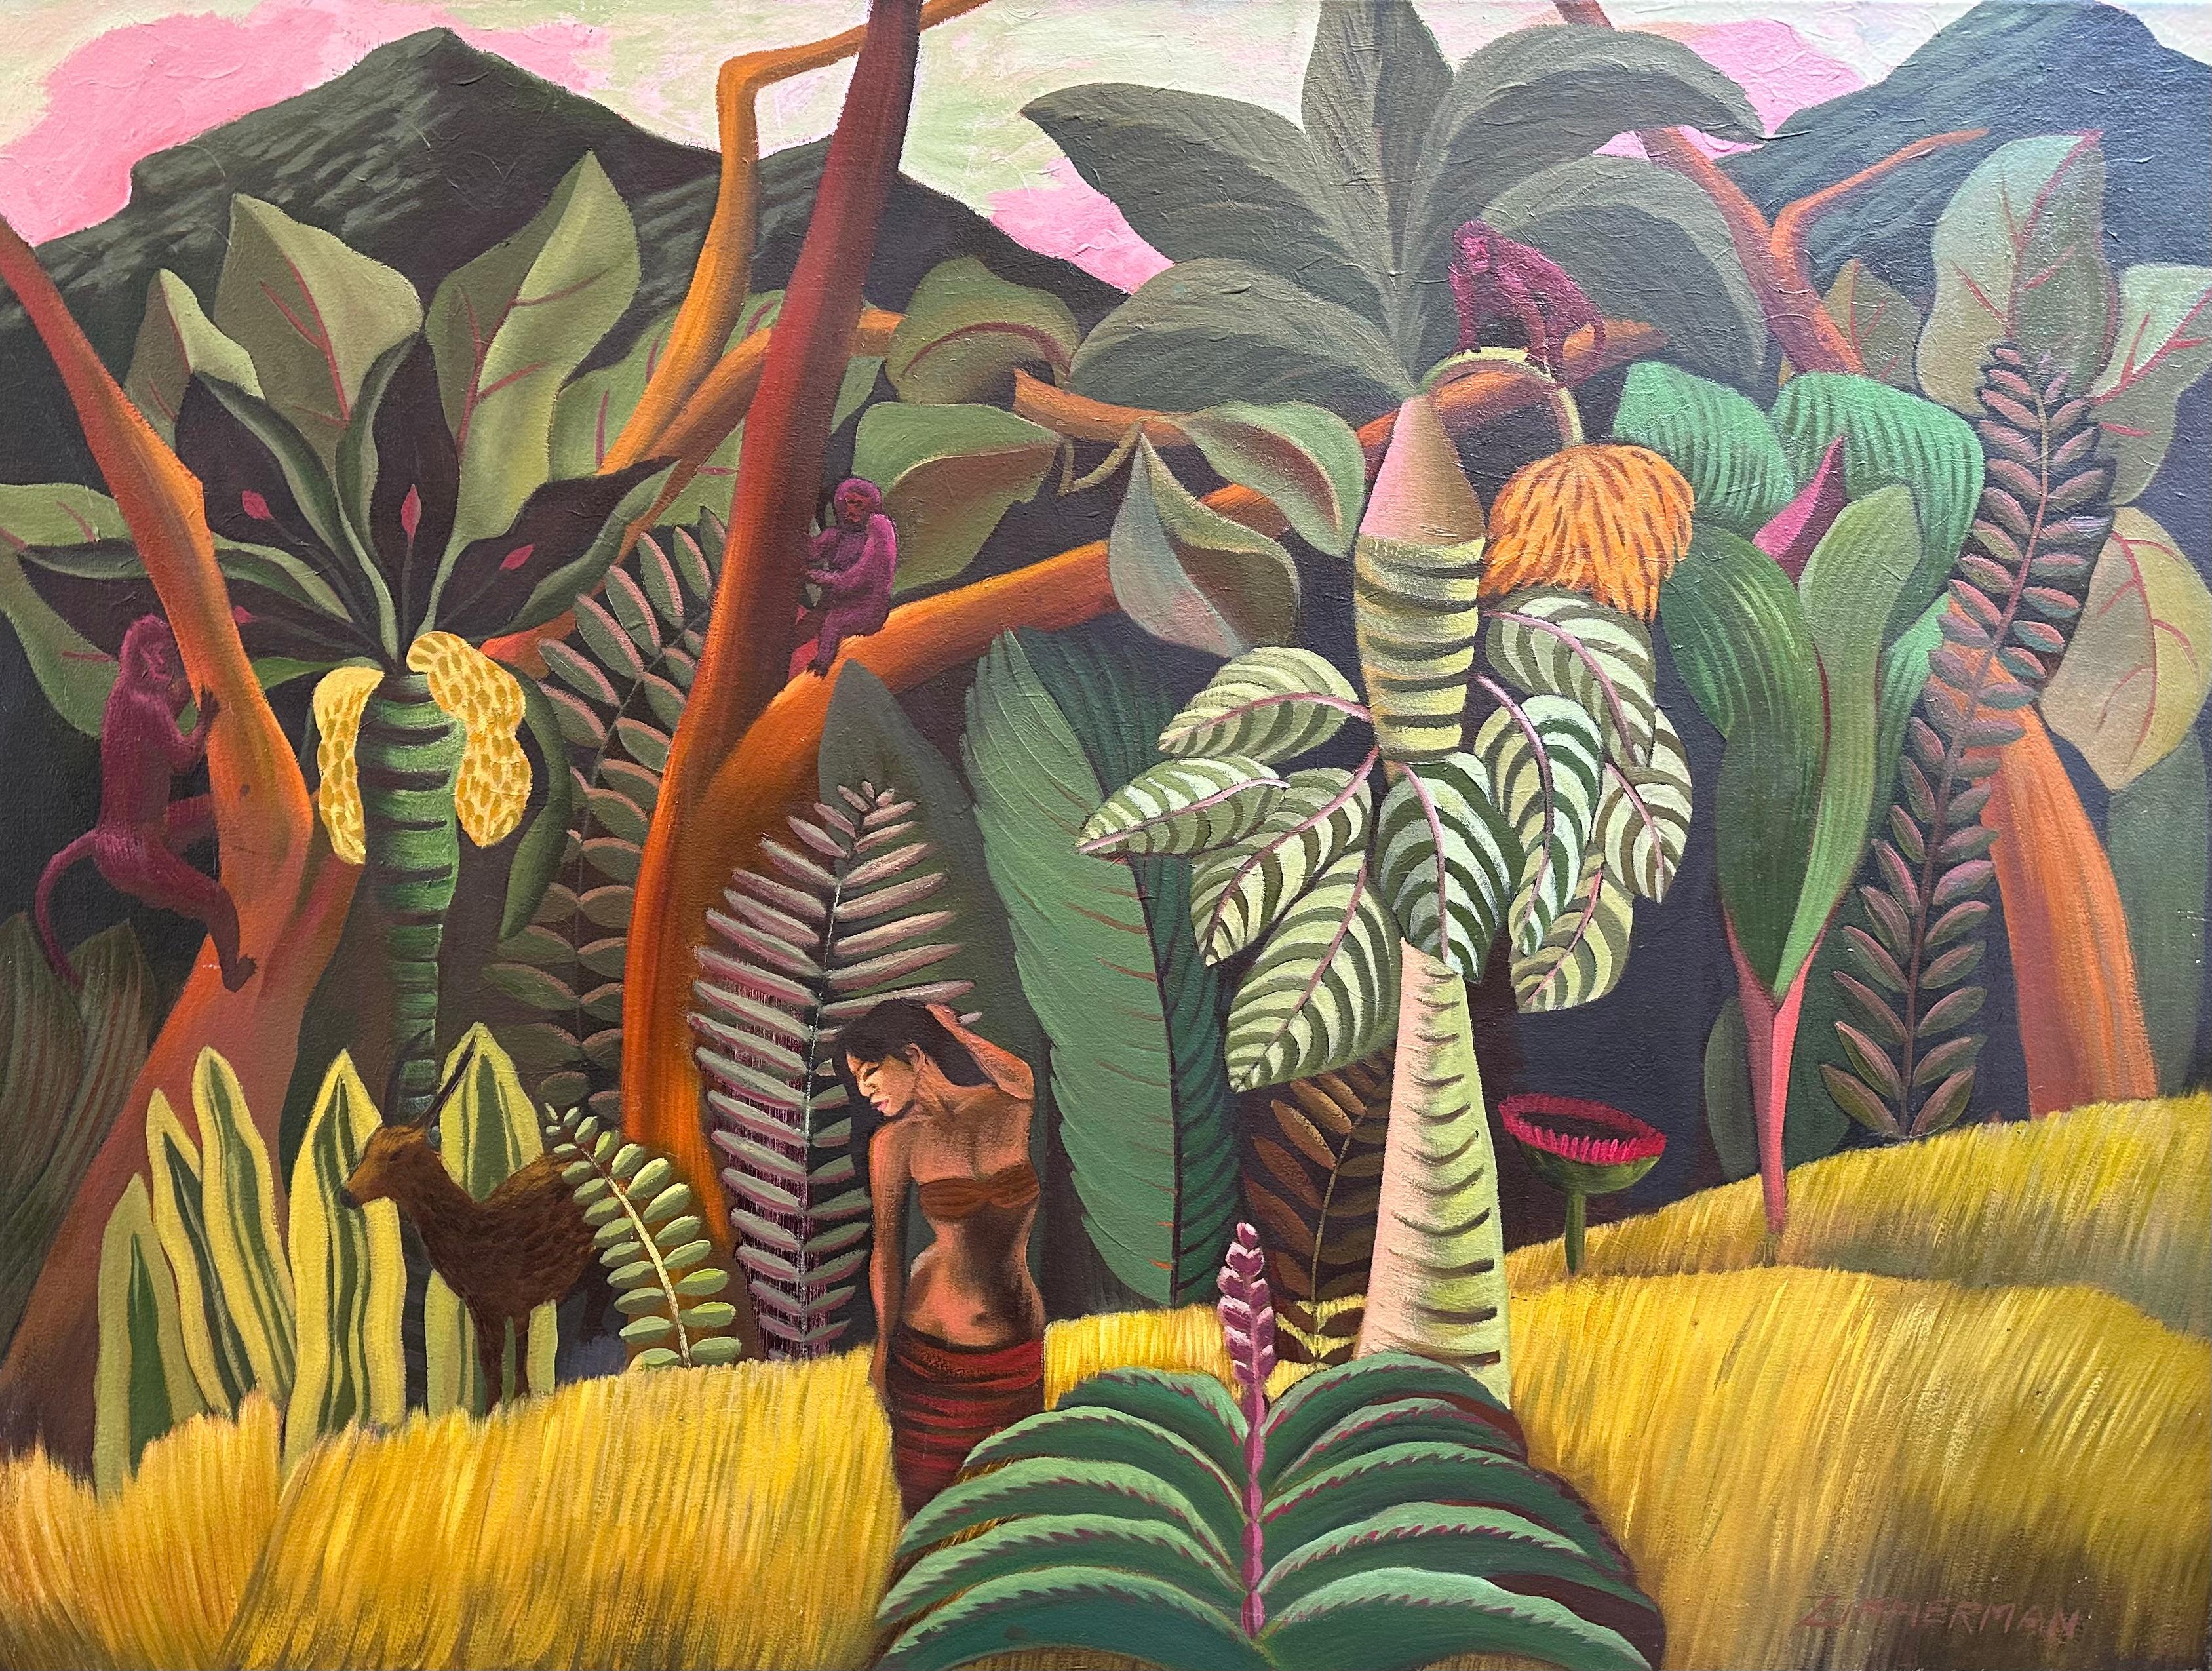 Jungle Rhythm - Tropical Landscape by Marc Zimmerman

Marc Zimmerman creates playful paintings, whether deep mysterious jungle or delightfully whimsical florals. His color palette explores various harmonies yet always surprises with new color